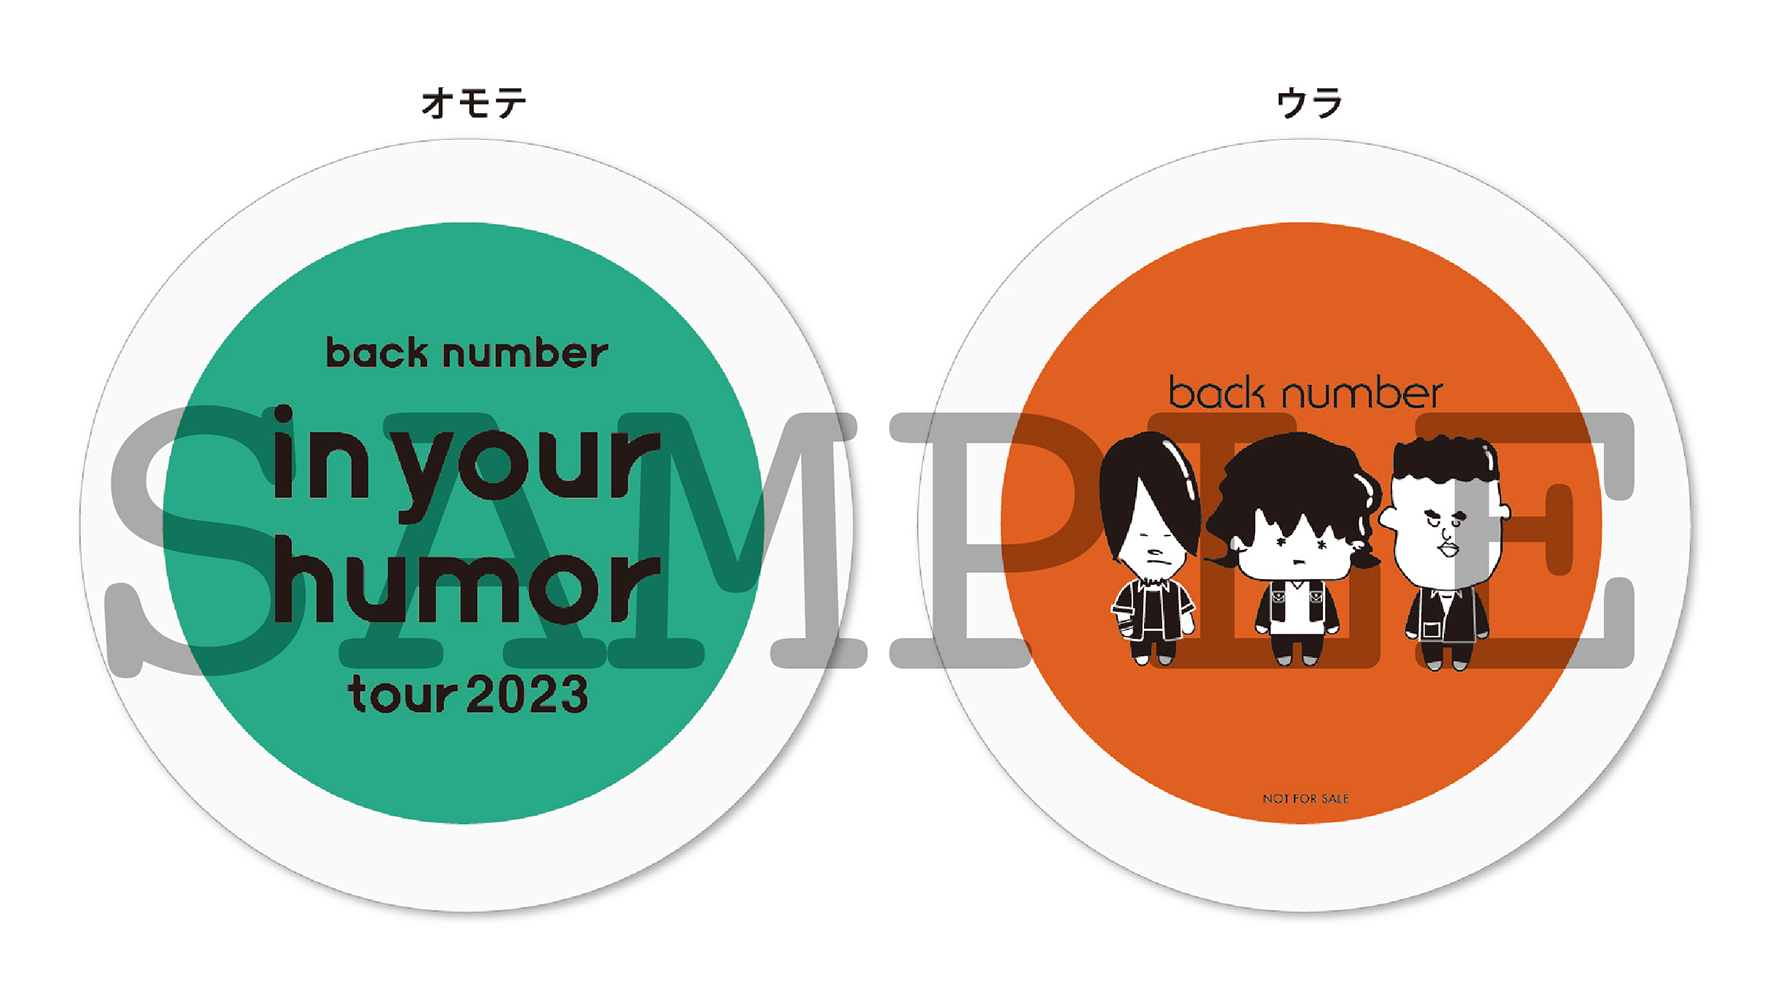 back number/in your humor tour 2023 ブルーレback_number - ミュージック